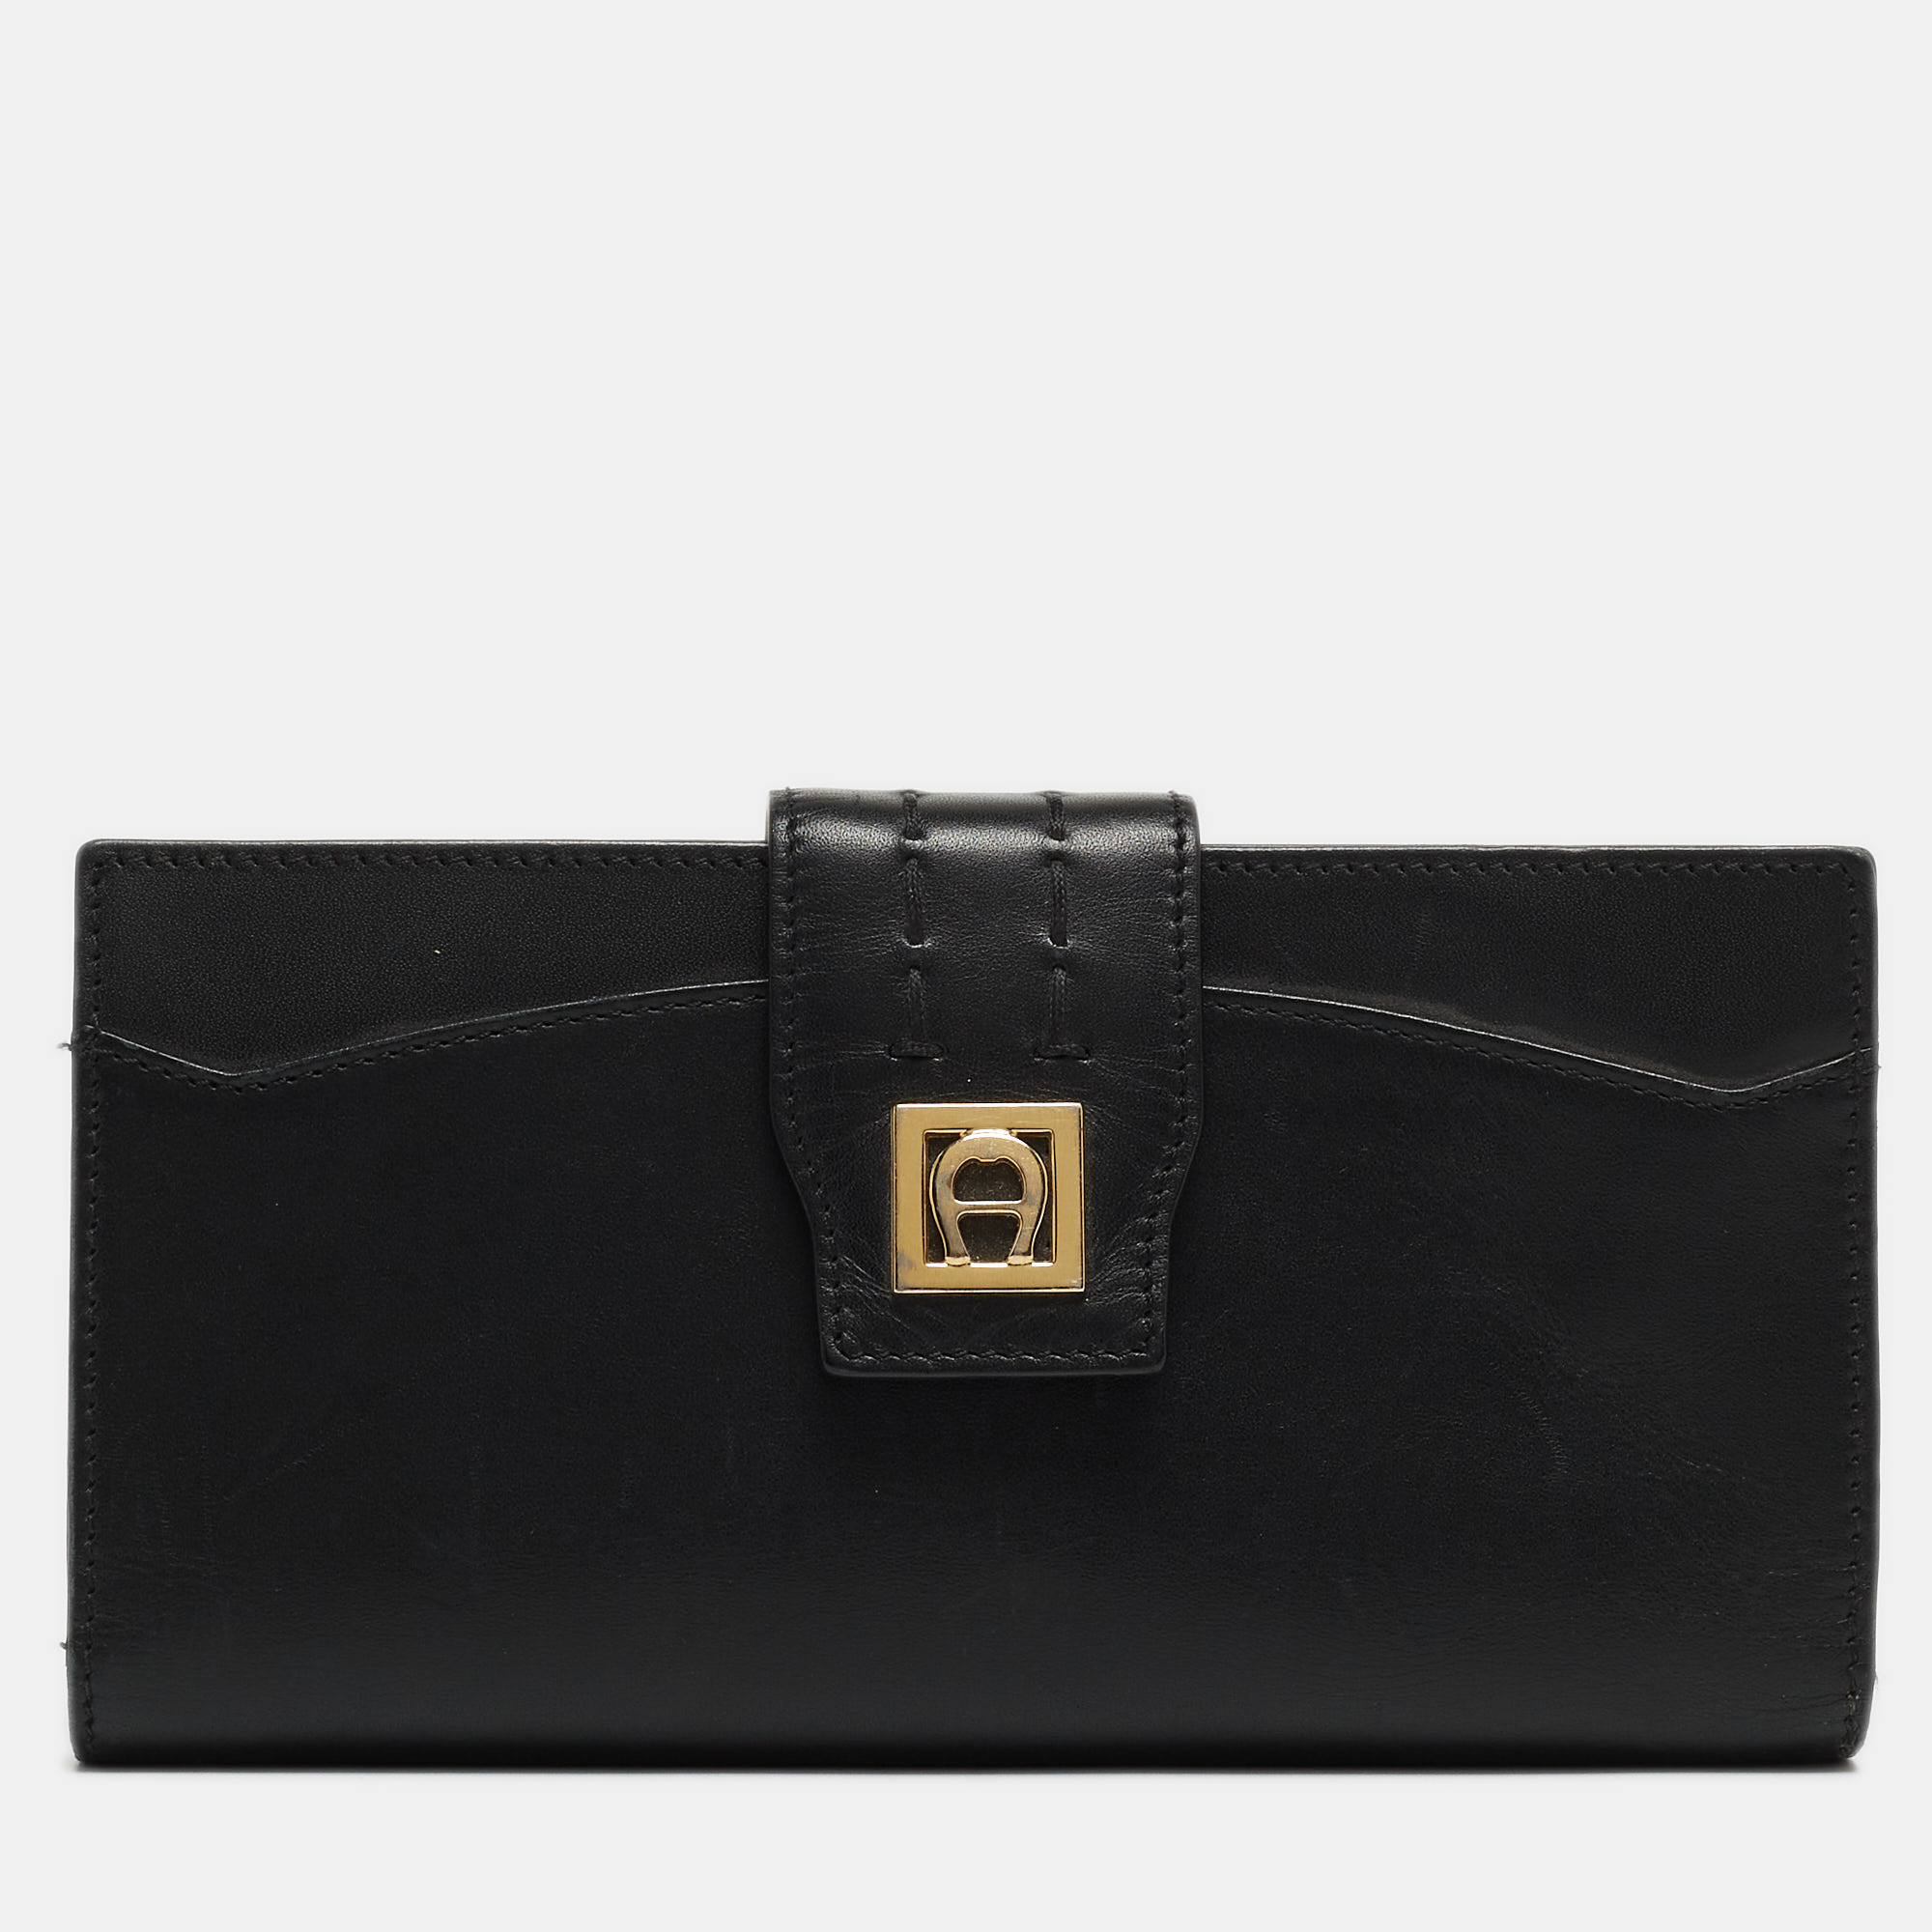 This wallet is conveniently designed for everyday use. It comes with a well structured interior for you to neatly arrange your cards and cash. This stylish piece is complete with a sleek appeal.